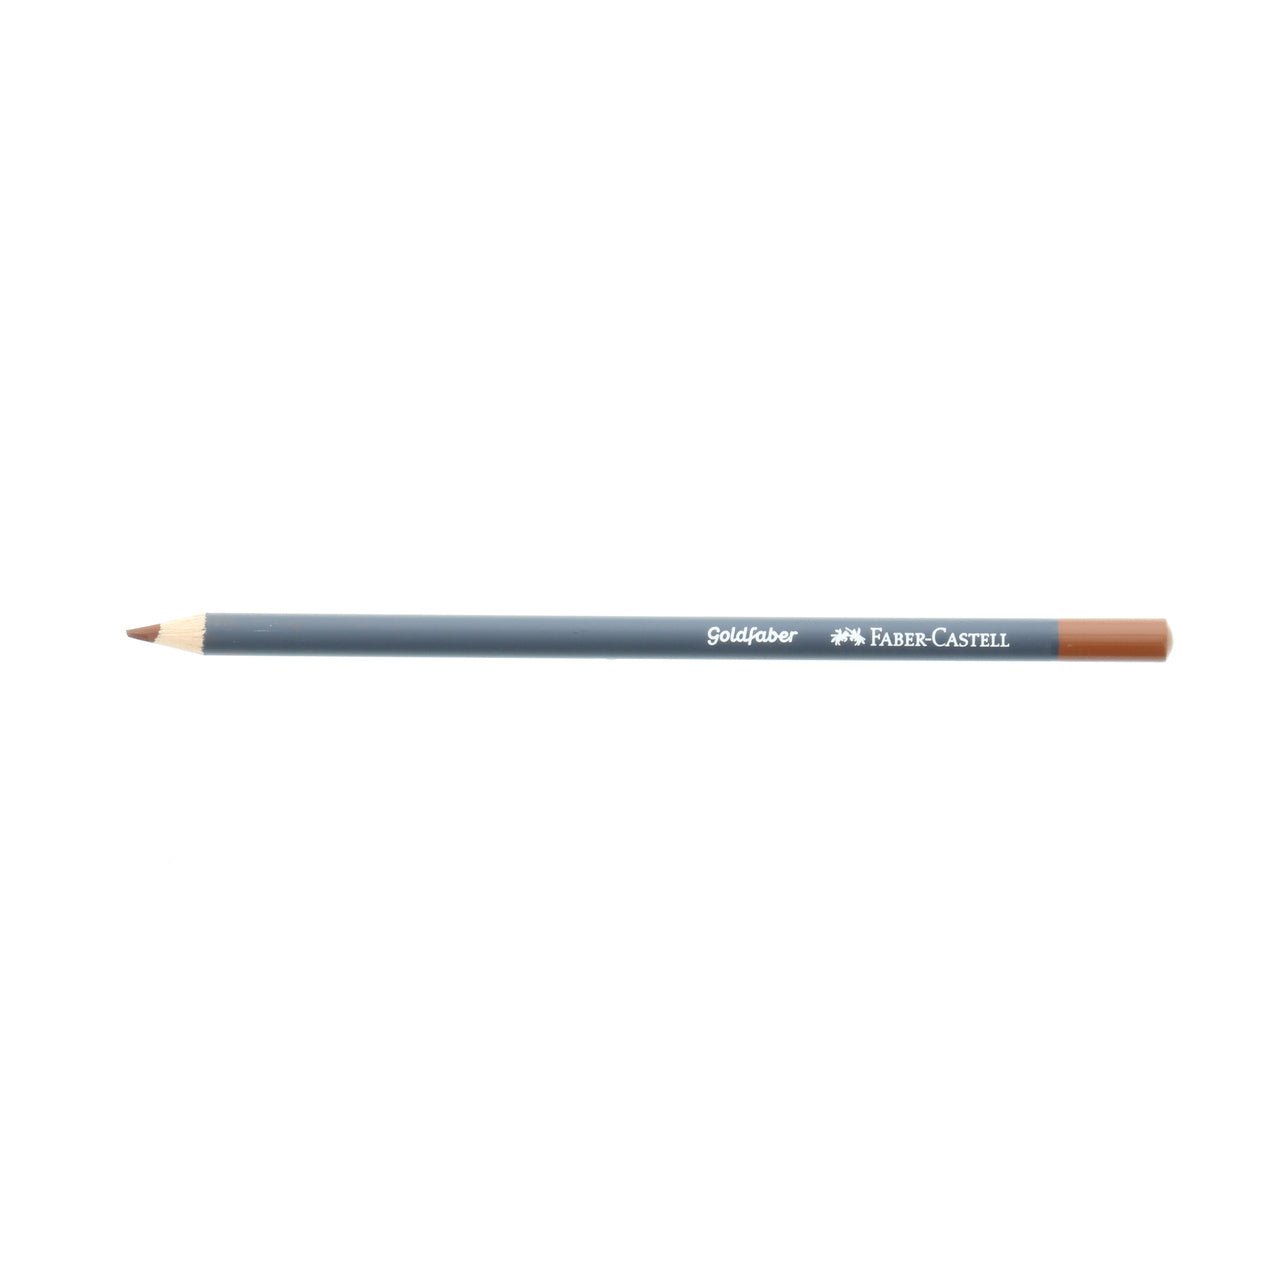 Goldfaber Colored Pencil 283 Burnt Sienna - merriartist.com